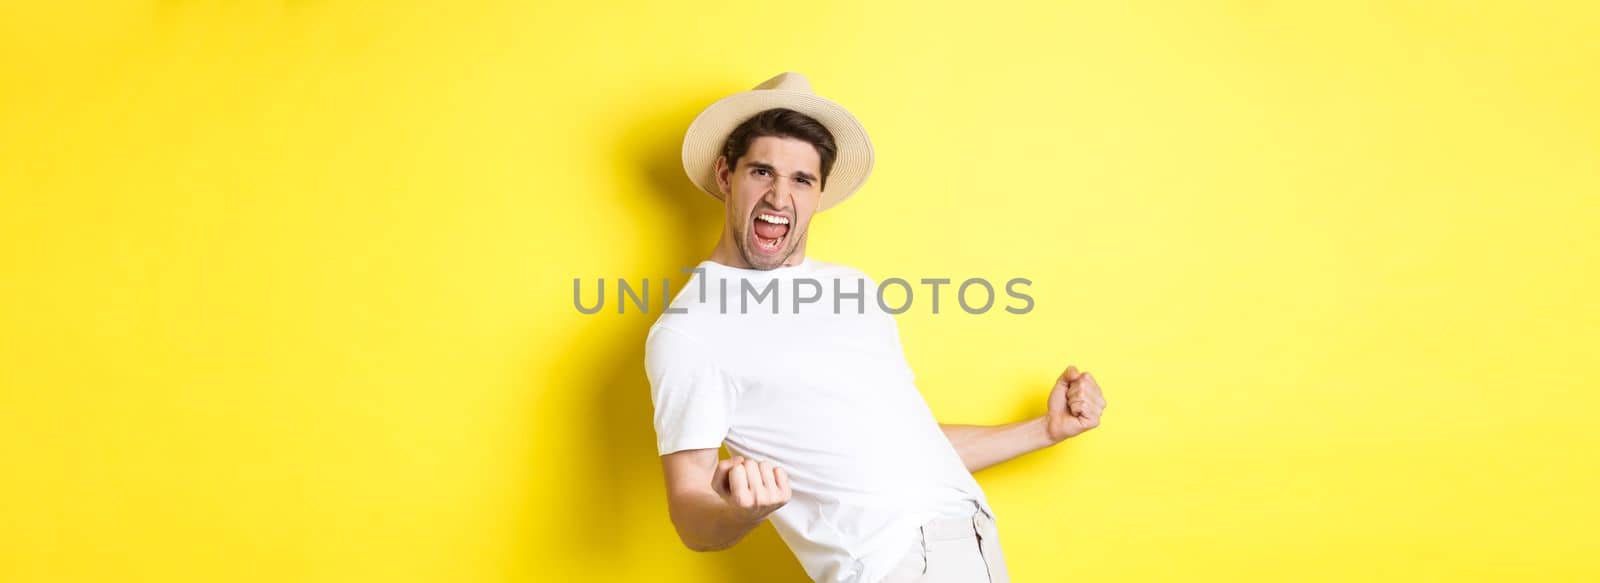 Concept of tourism and vacation. Satisfied young male tourist celebrating, winning something and rejoicing, making fist pump and shouting yes, standing against yellow background.